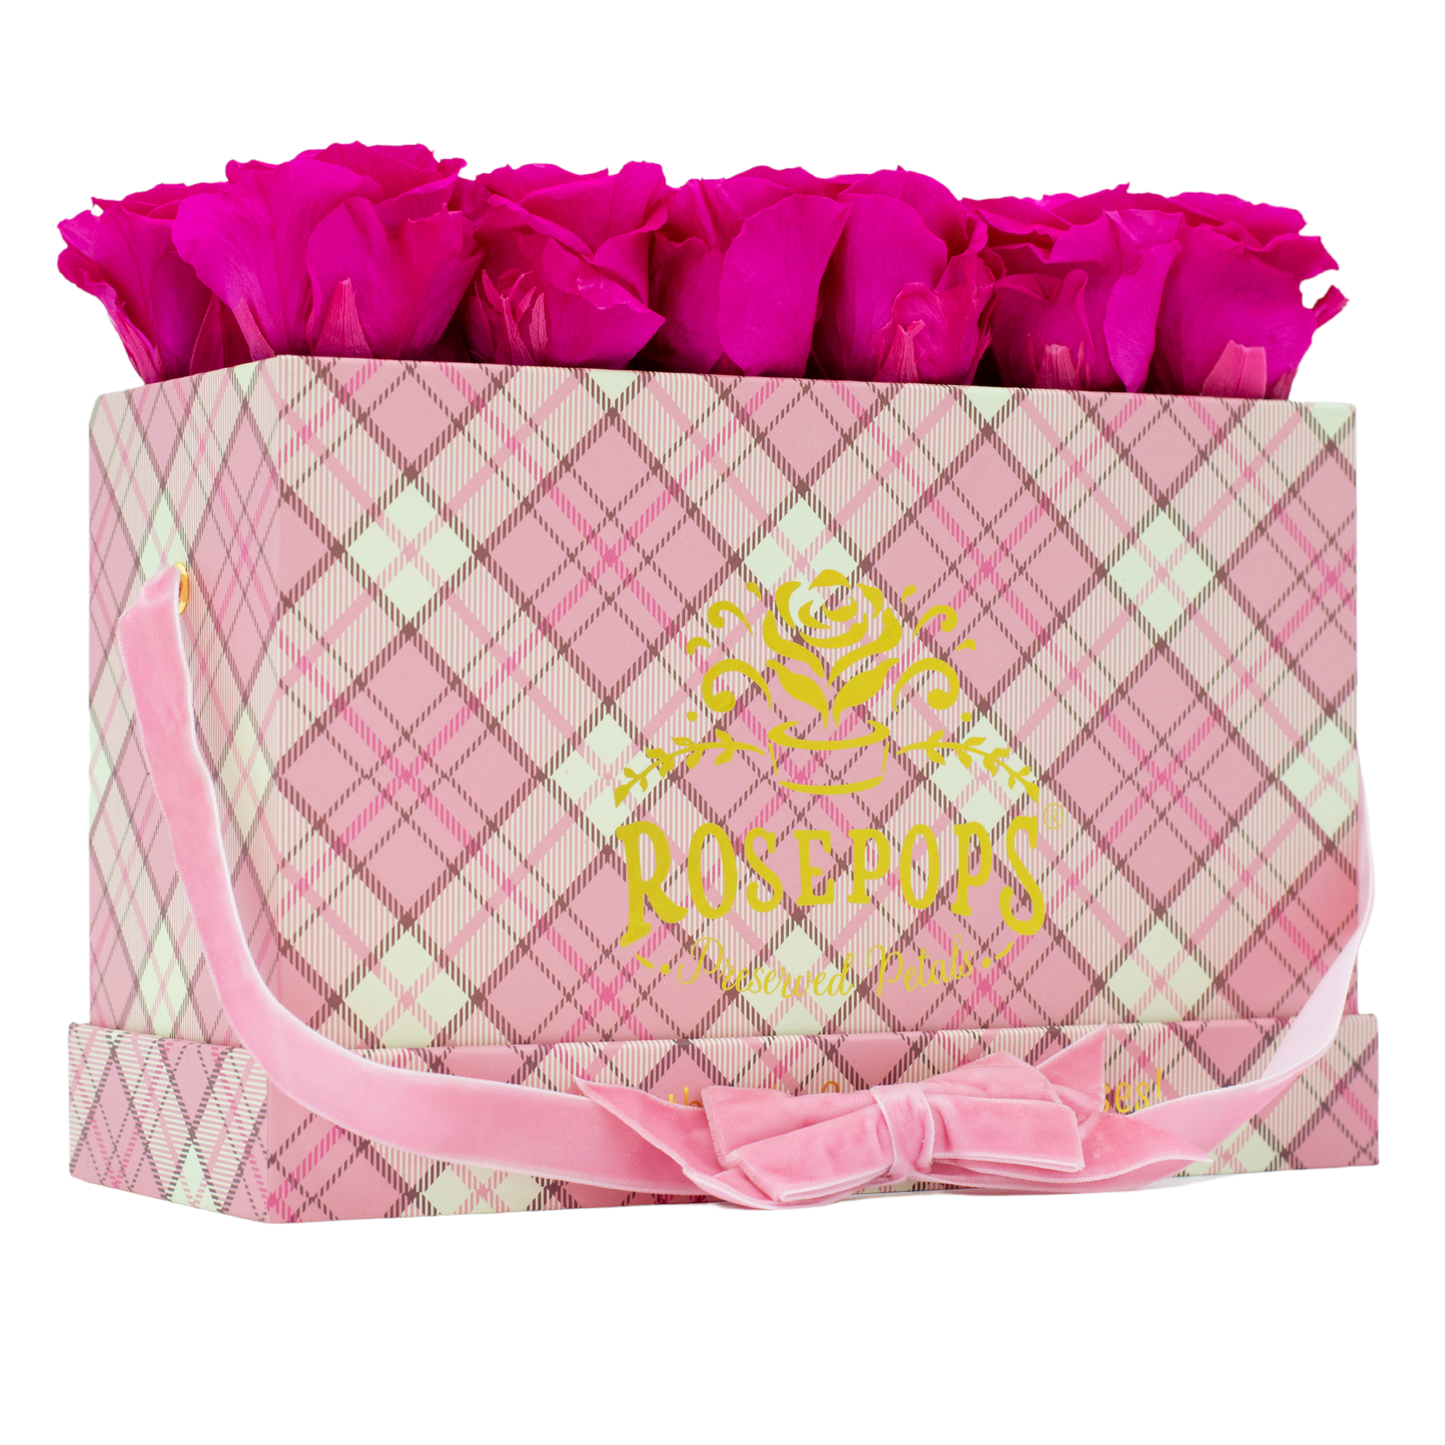 The Preppy Pink Keeper by the Dozen DELUXE